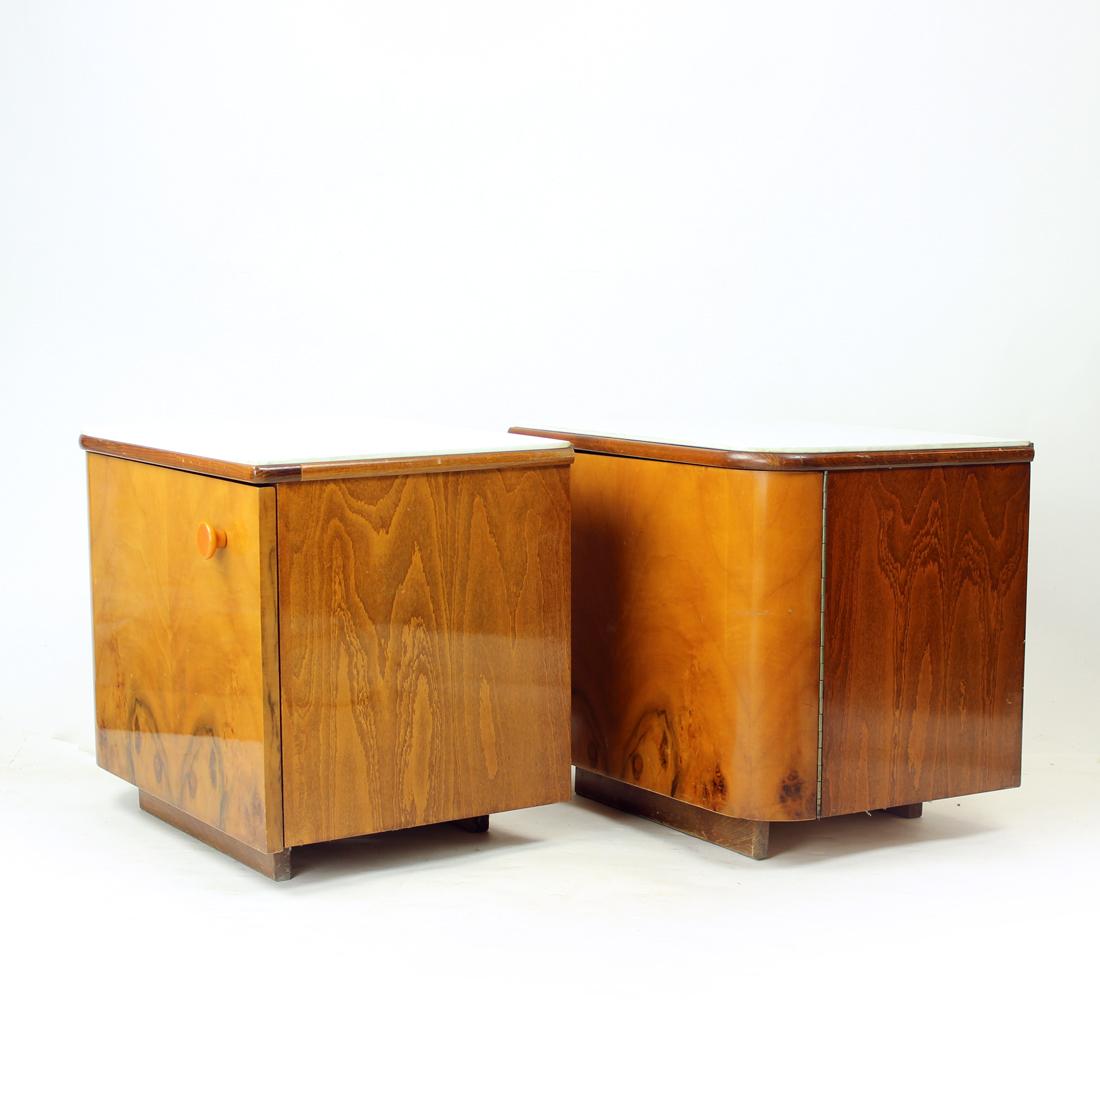 1960s Bedside Tables In Walnut And White Glass, Czechoslovakia For Sale 5